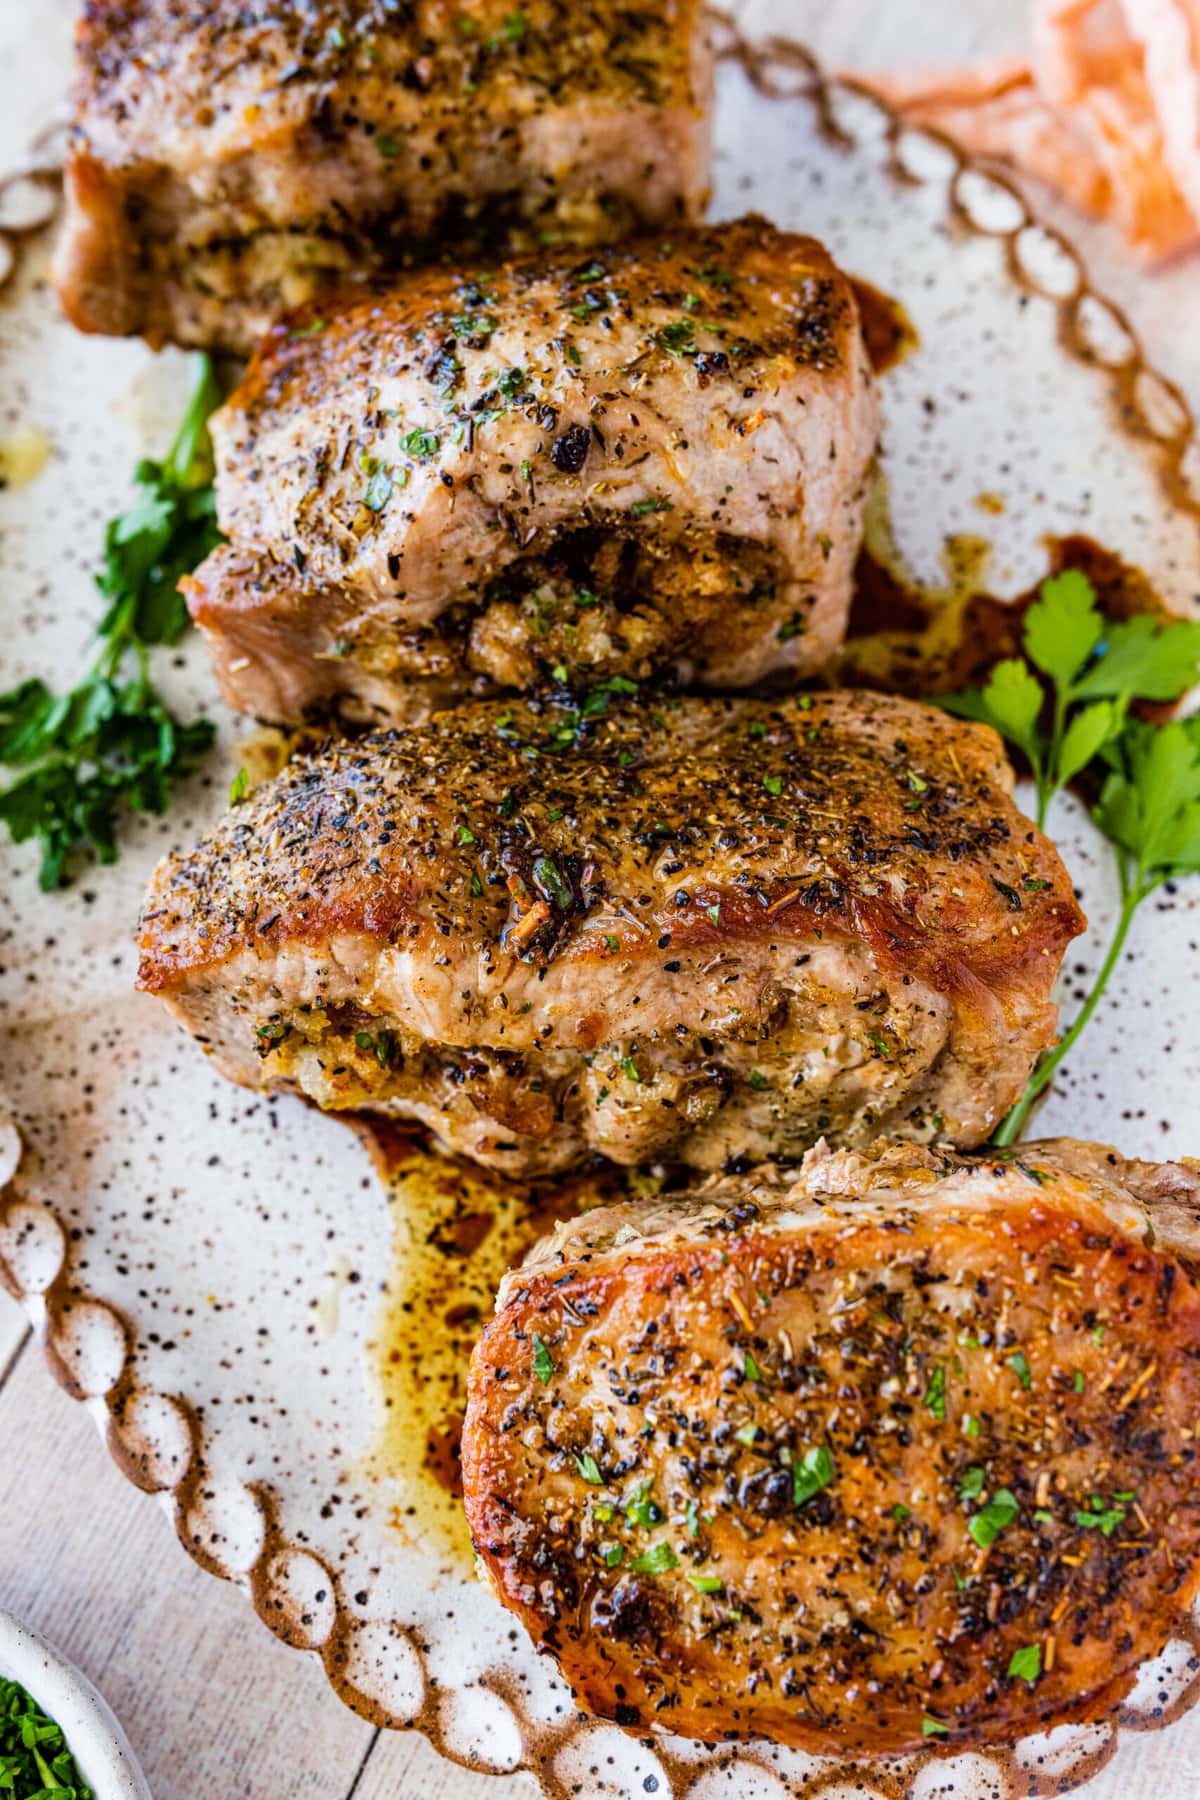 oven baked stuffed pork chops on a large serving platter with herbs as garnish.